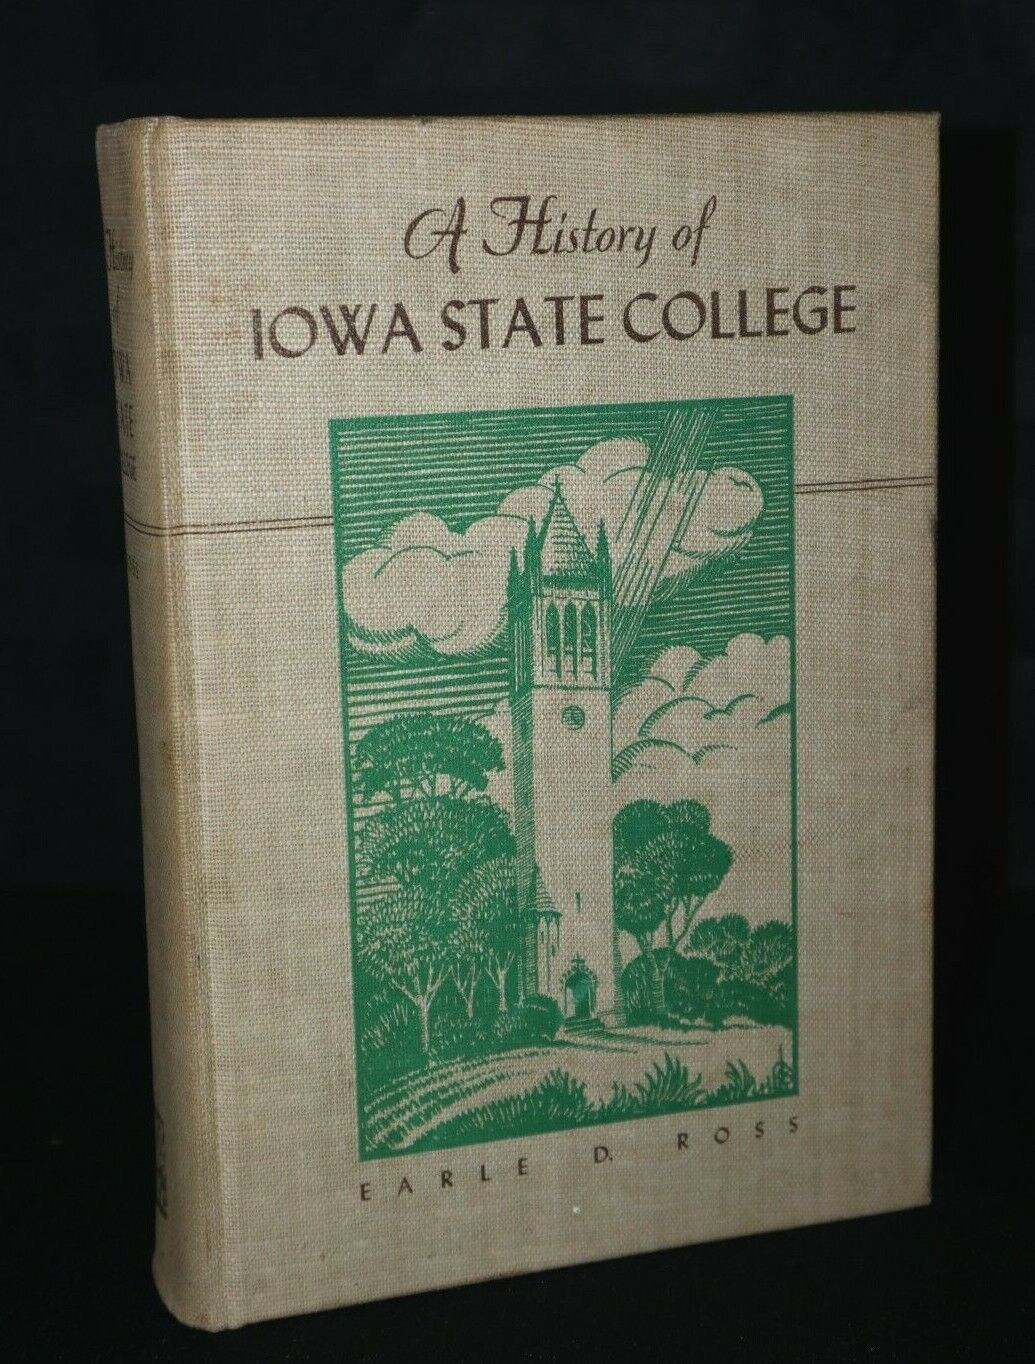 A History Of Iowa State College by Earle D. Ross~Hb, 1942, 1st Ed.